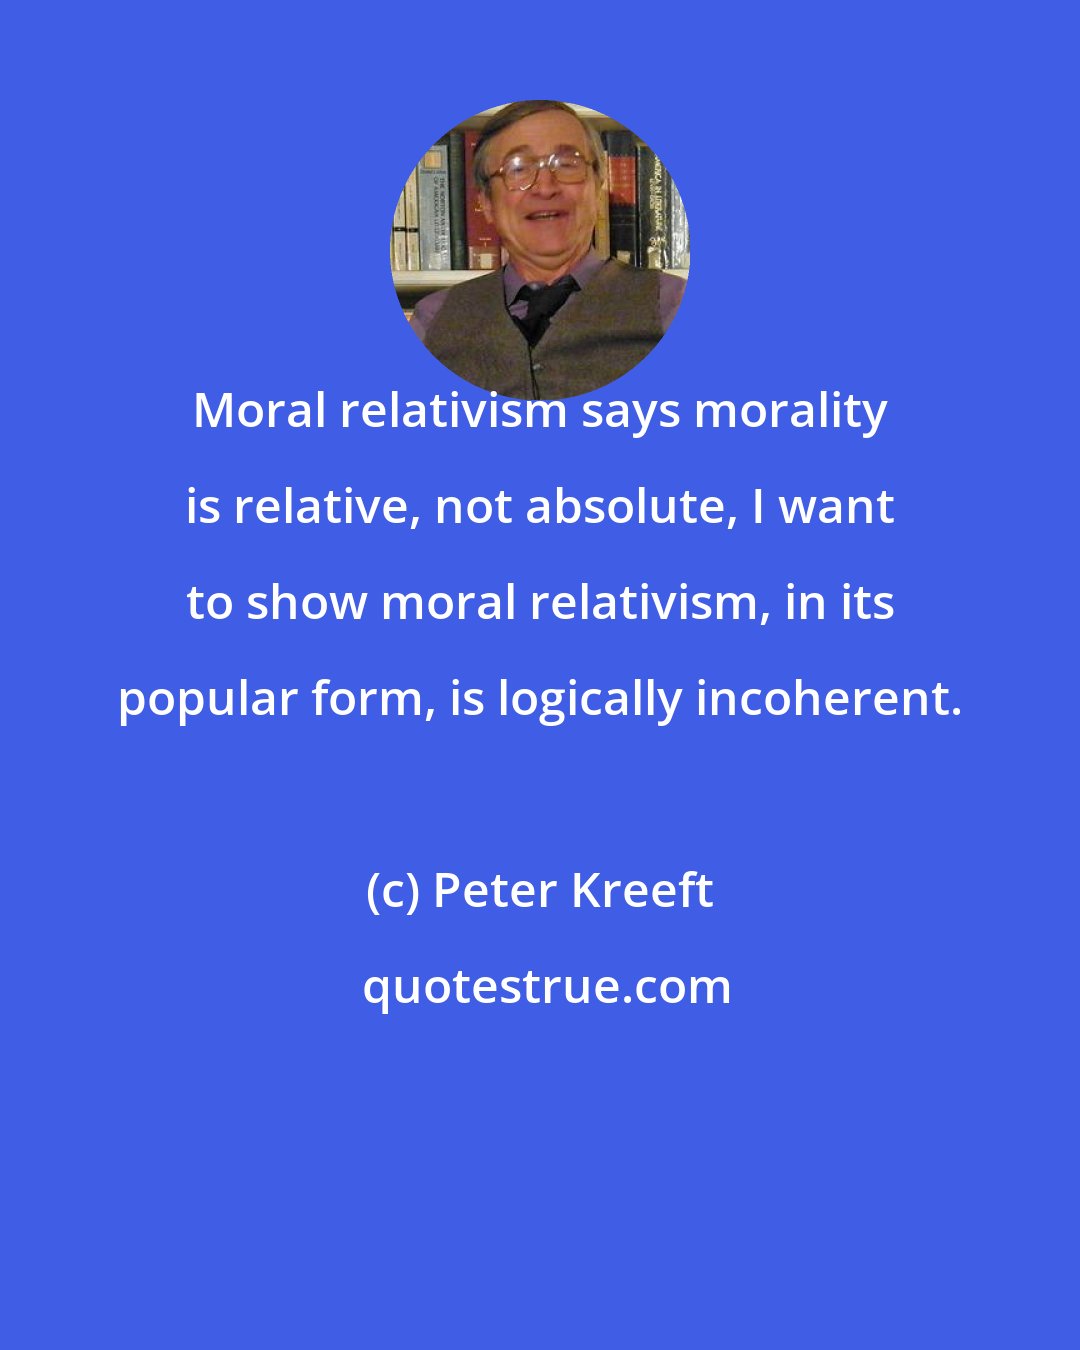 Peter Kreeft: Moral relativism says morality is relative, not absolute, I want to show moral relativism, in its popular form, is logically incoherent.